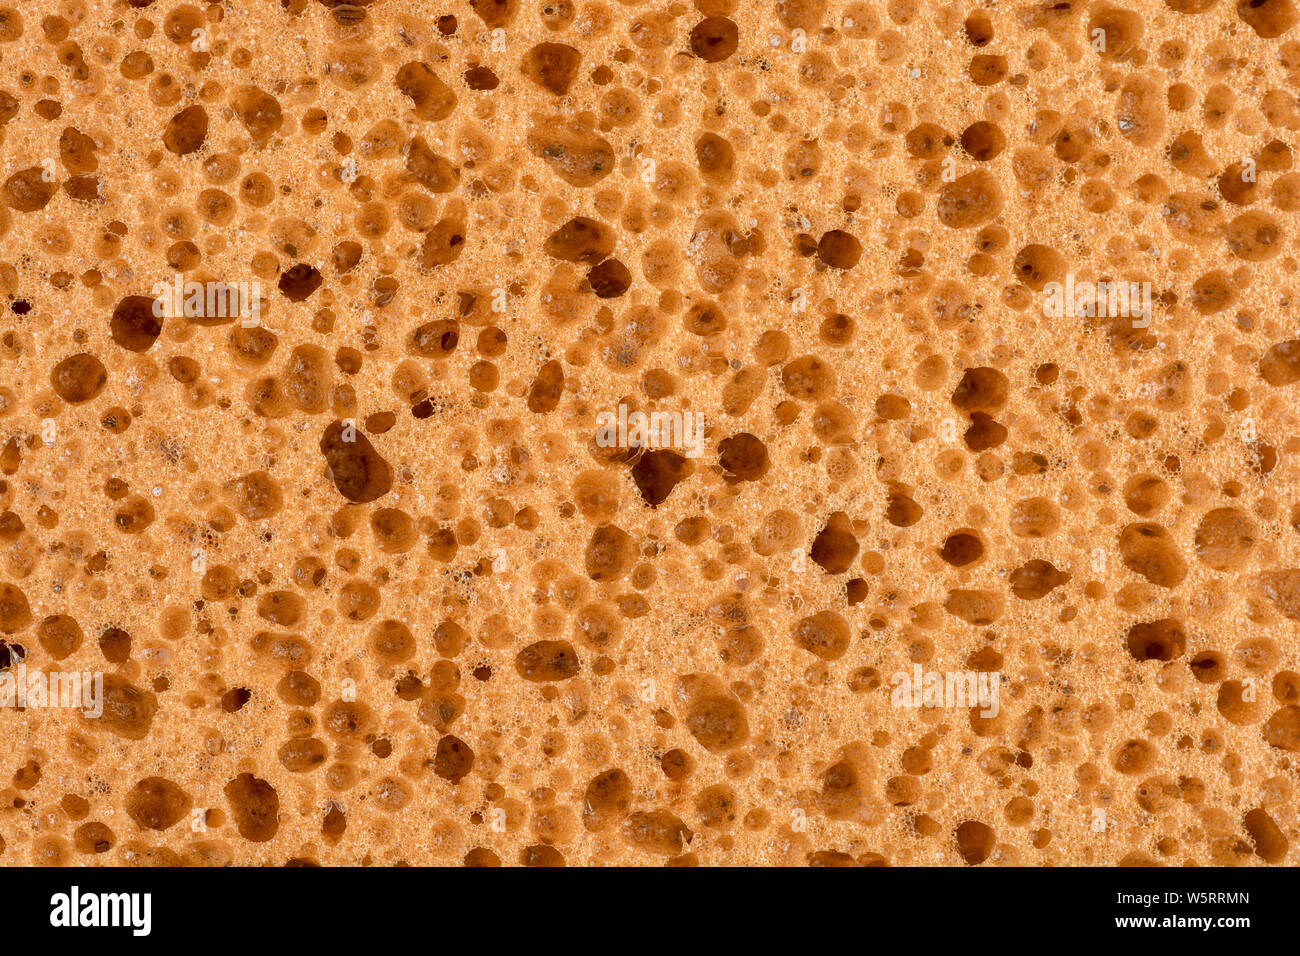 Yellow sponges stock image. Image of textured, pores - 30249997